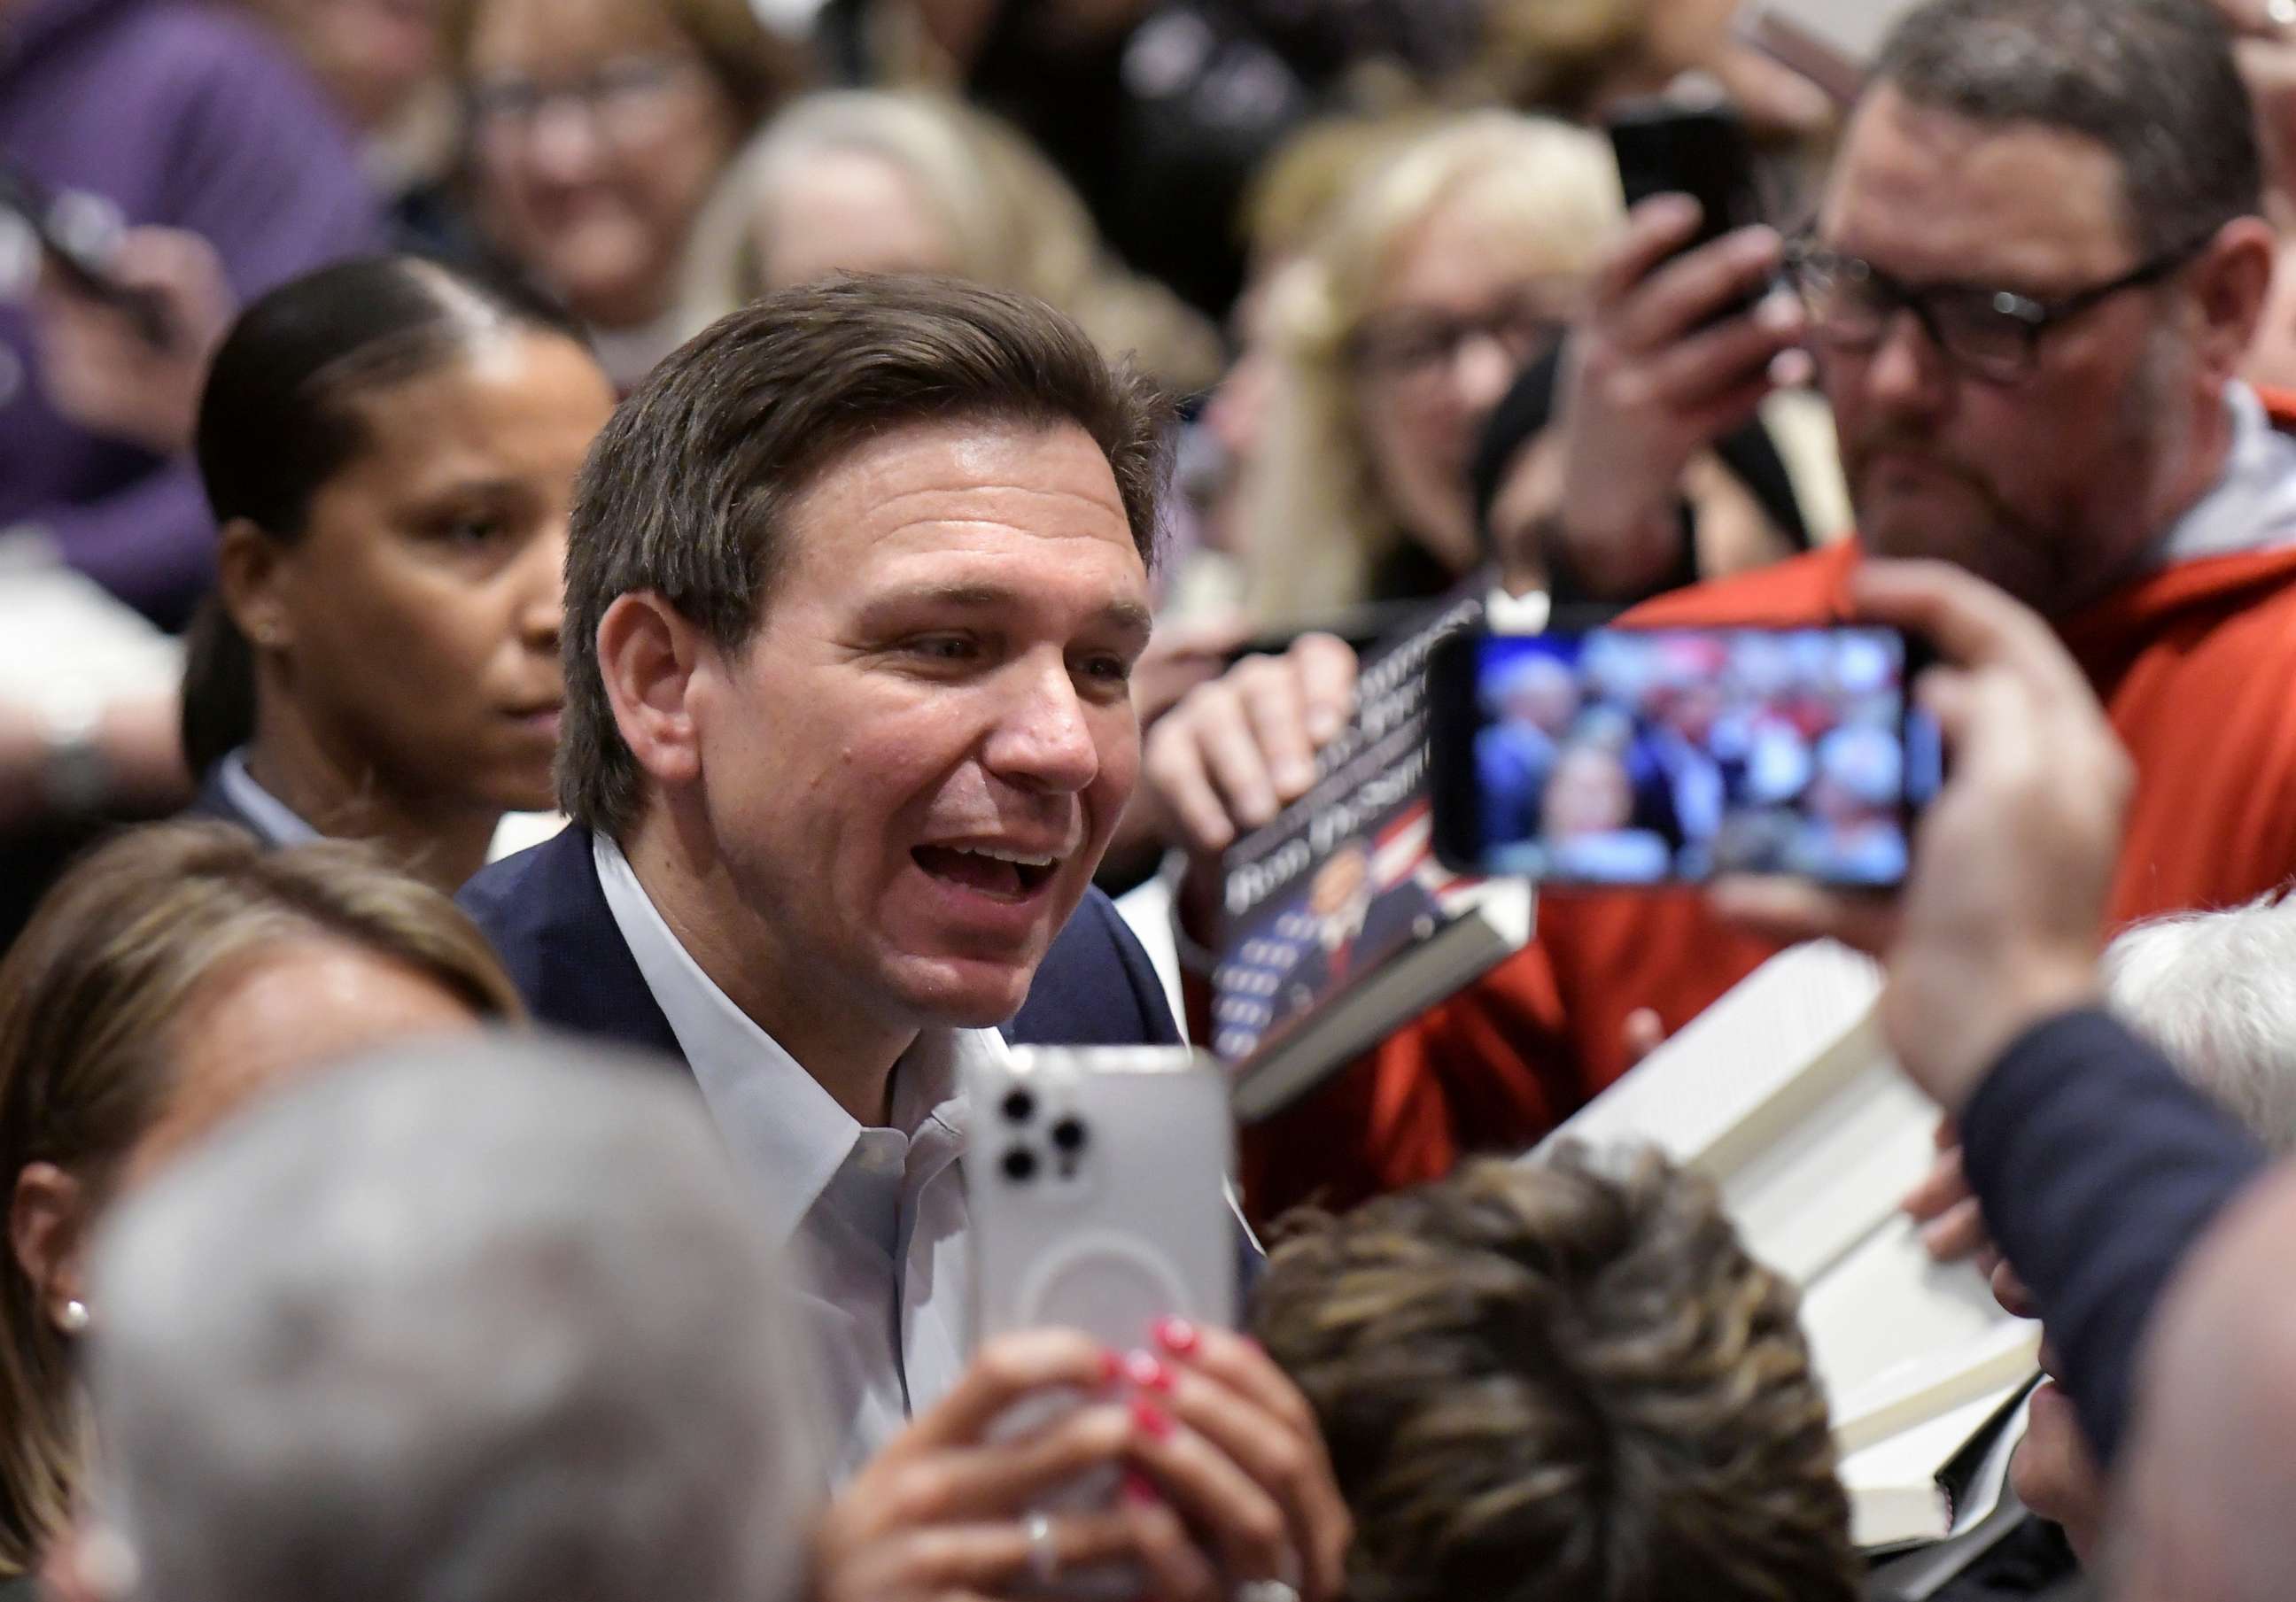 PHOTO: Florida Gov. Ron DeSantis greets people in the crowd during an event, Mar. 10, 2023, in Davenport, Iowa.